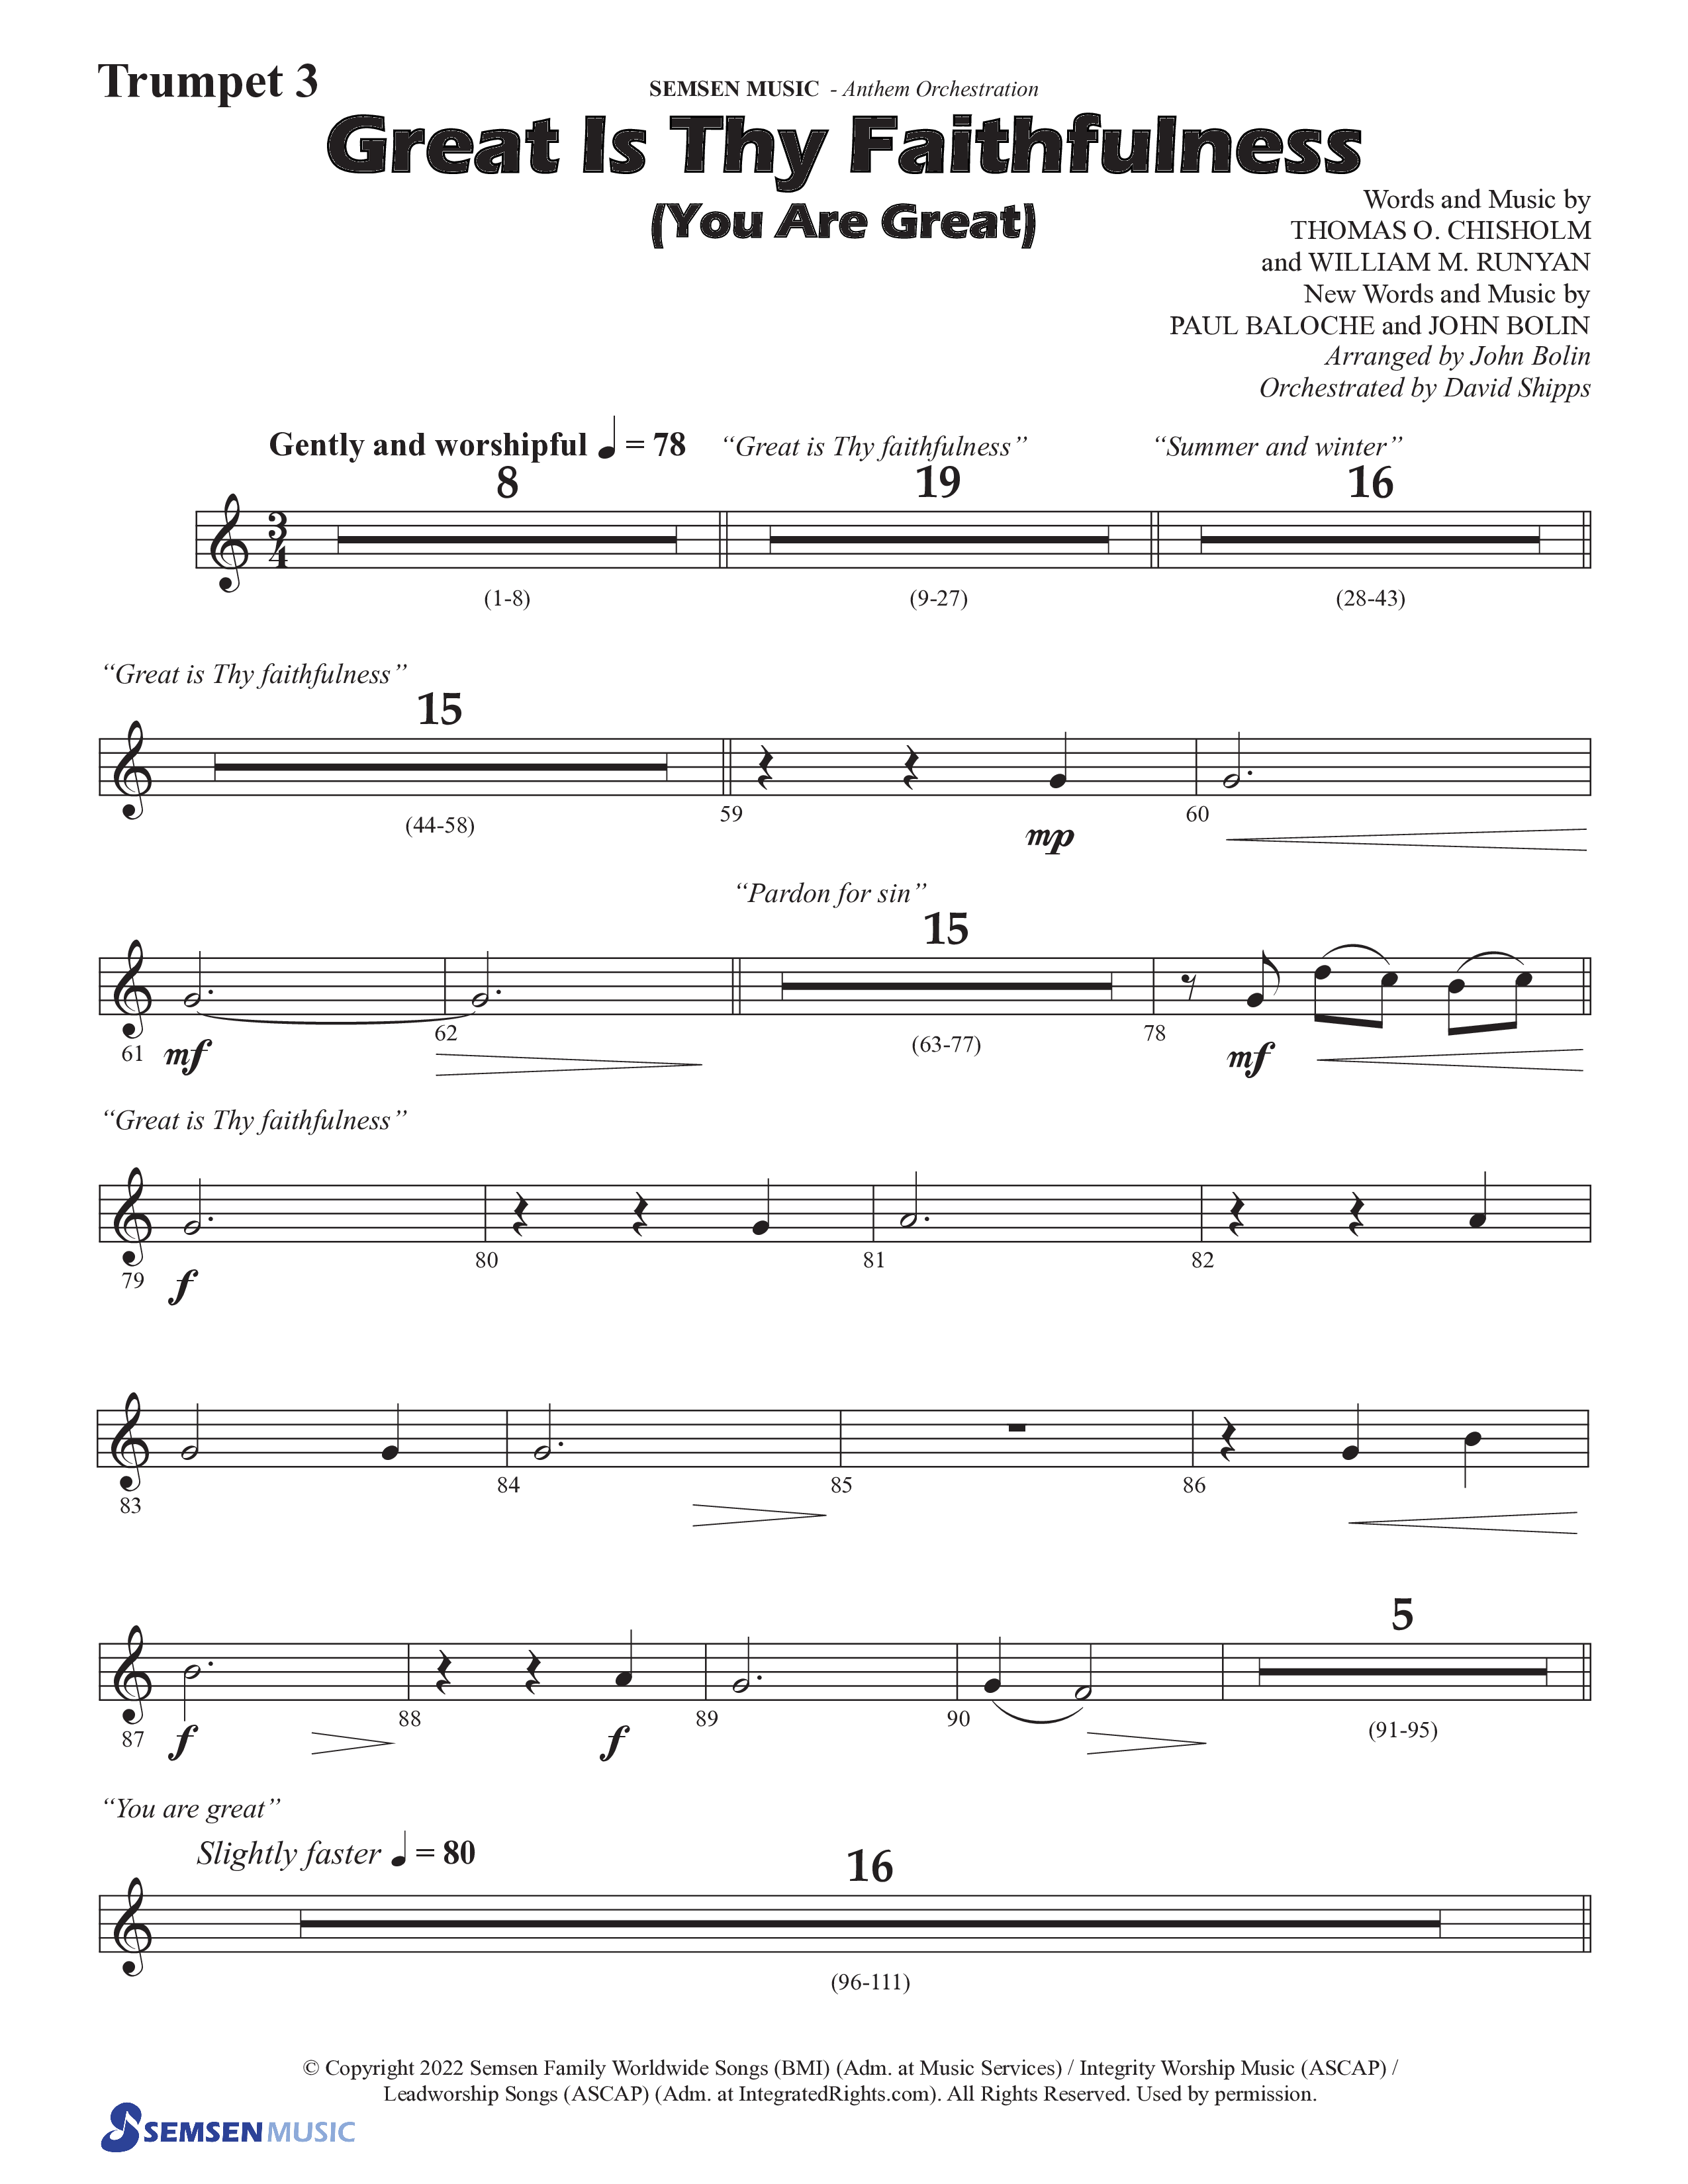 Great Is Thy Faithfulness (You Are Great) (Choral Anthem SATB) Trumpet 3 (Semsen Music / Arr. John Bolin / Orch. David Shipps)